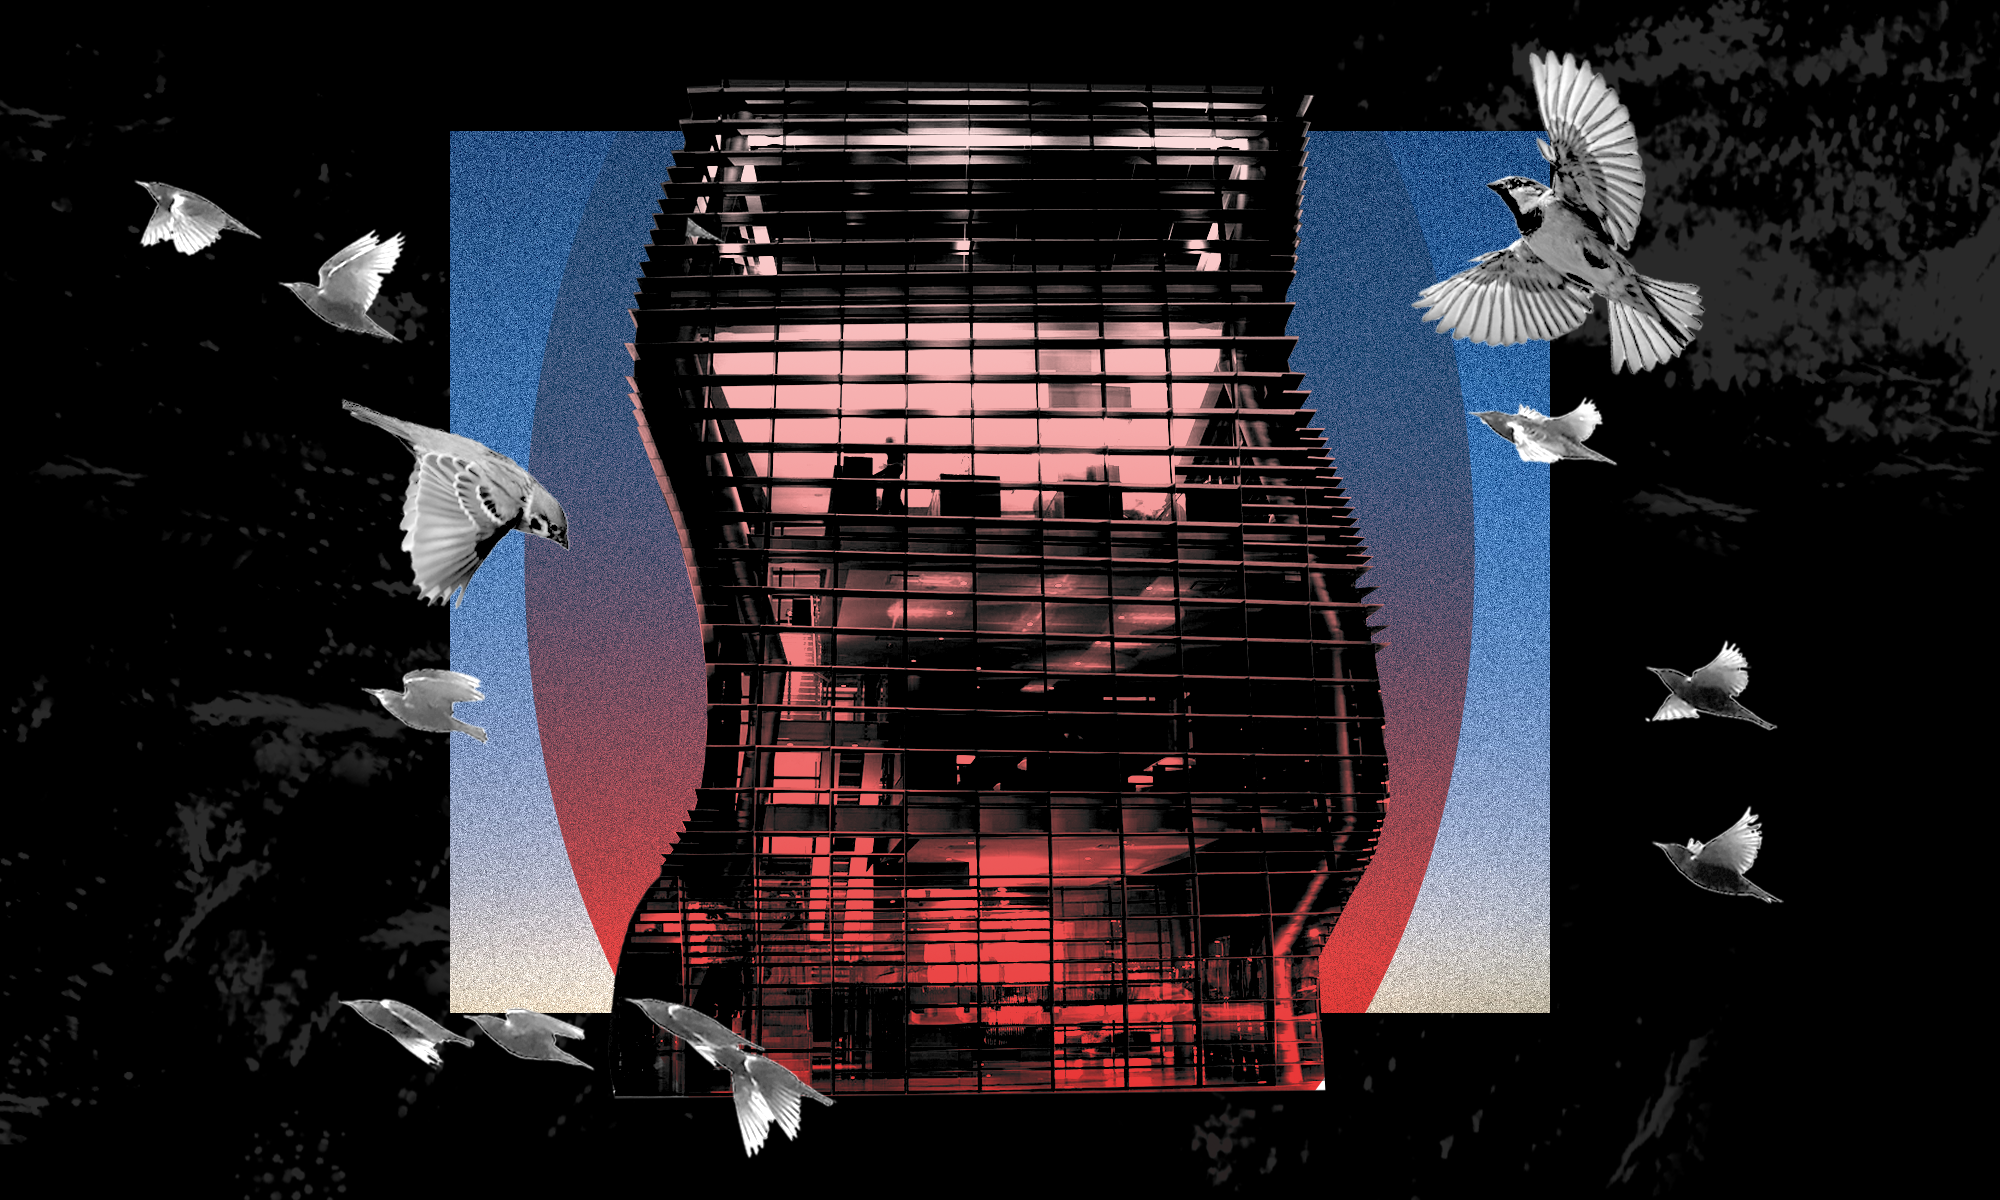 A collage-like graphic of an undulating glass and metal tower with a wavy structure standing against a blue sky, framed by a black background and with birds flying around it. 